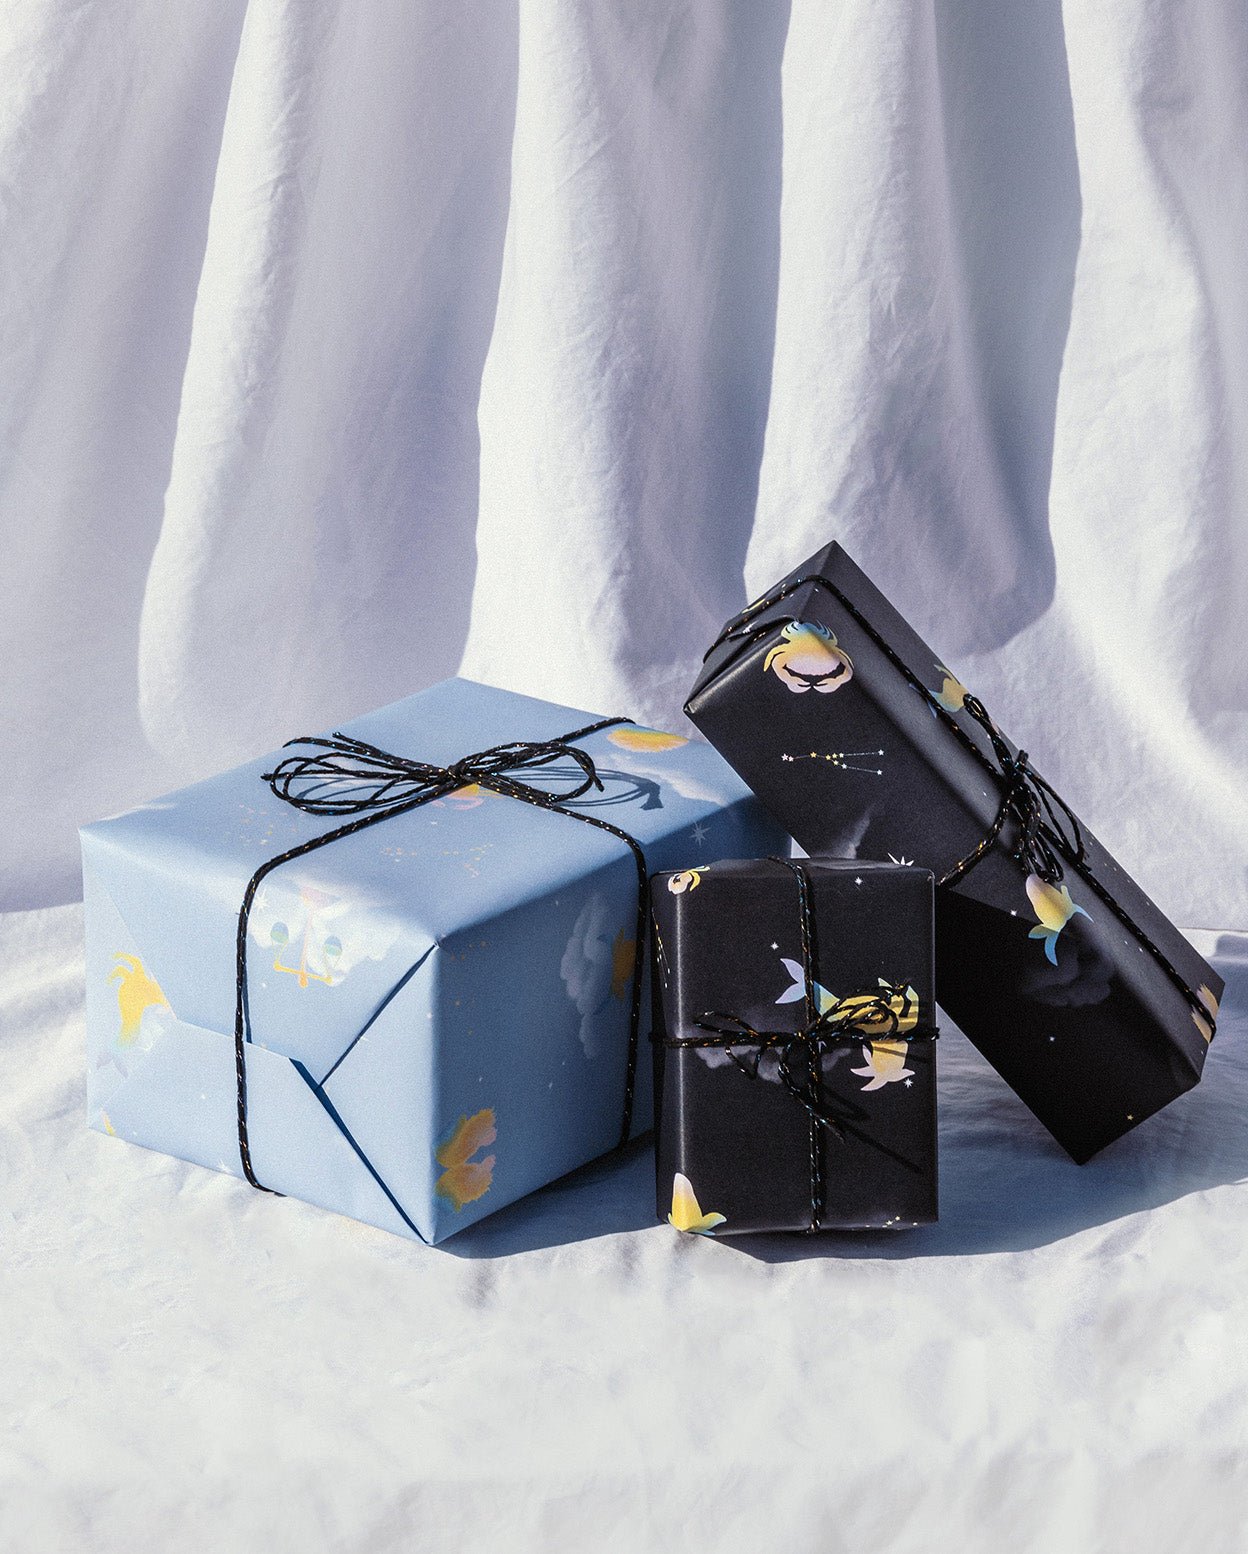 Presents wrapped with &quot;Day&quot; and &quot;Night&quot; horoscope gift wrap tied with black and white string against a fabric white background.